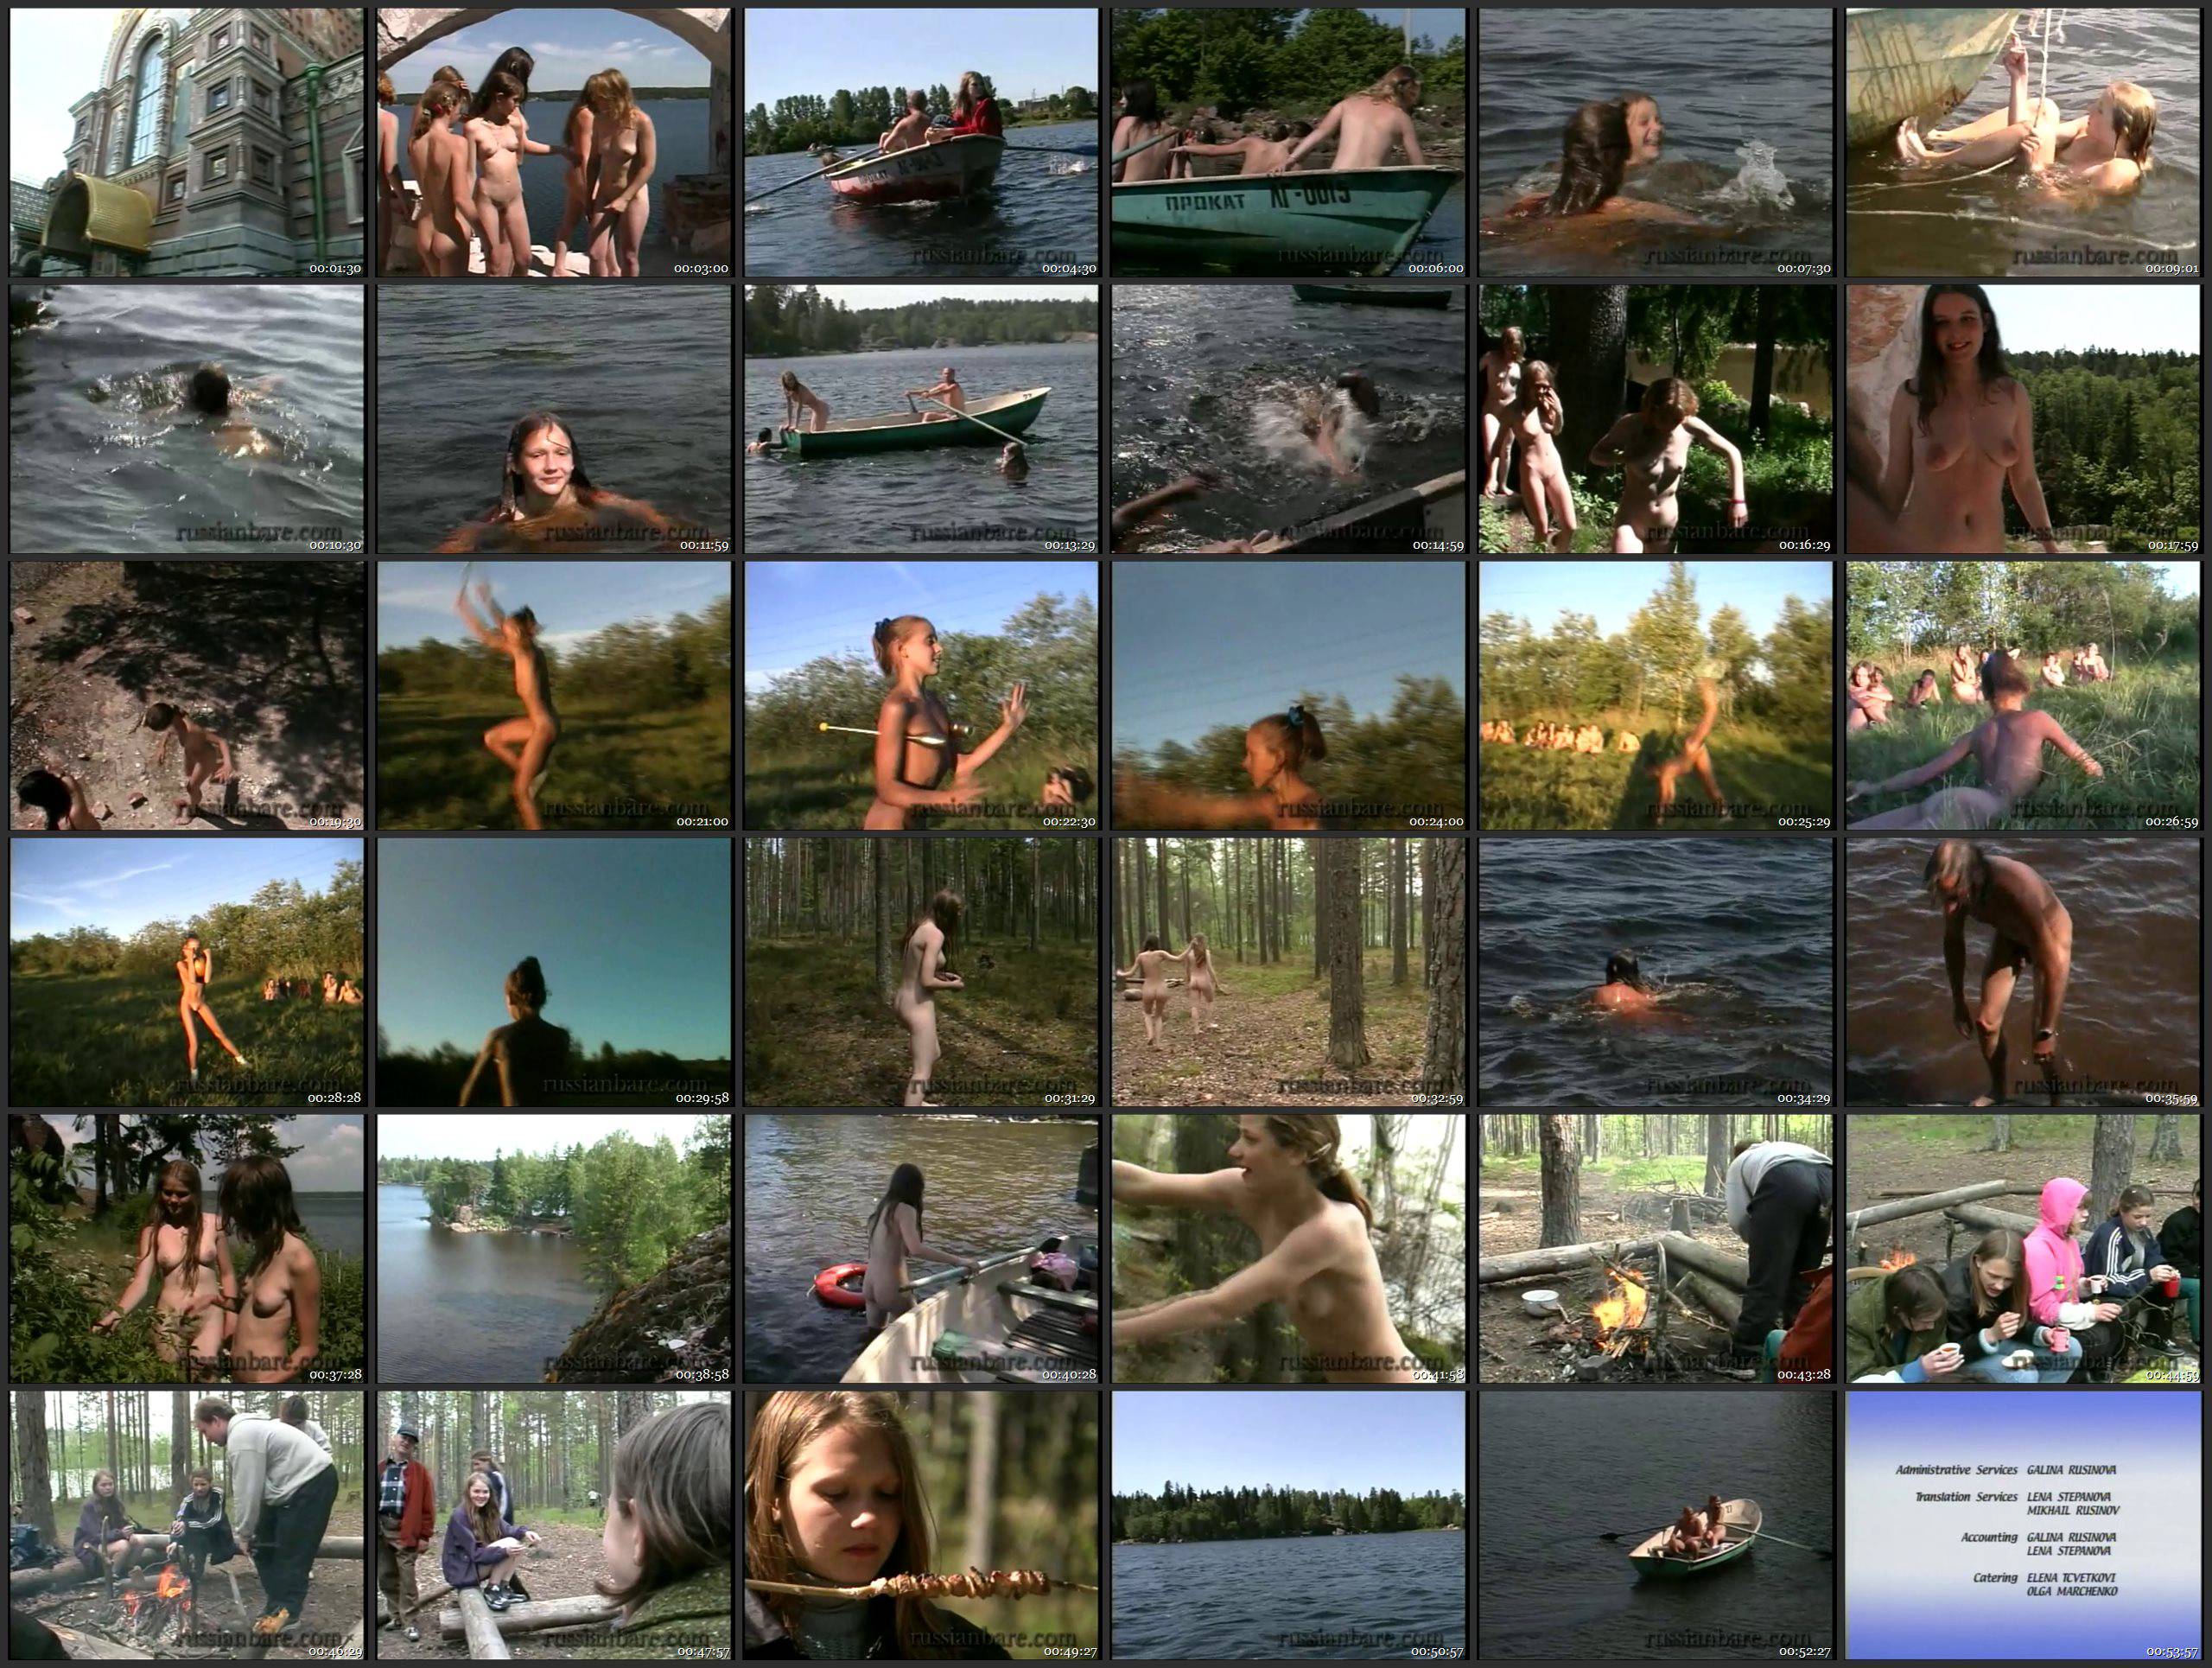 RussianBare and Enature Videos Castle Naturism - Naturism in Russia 2000 Series - Thumbnails